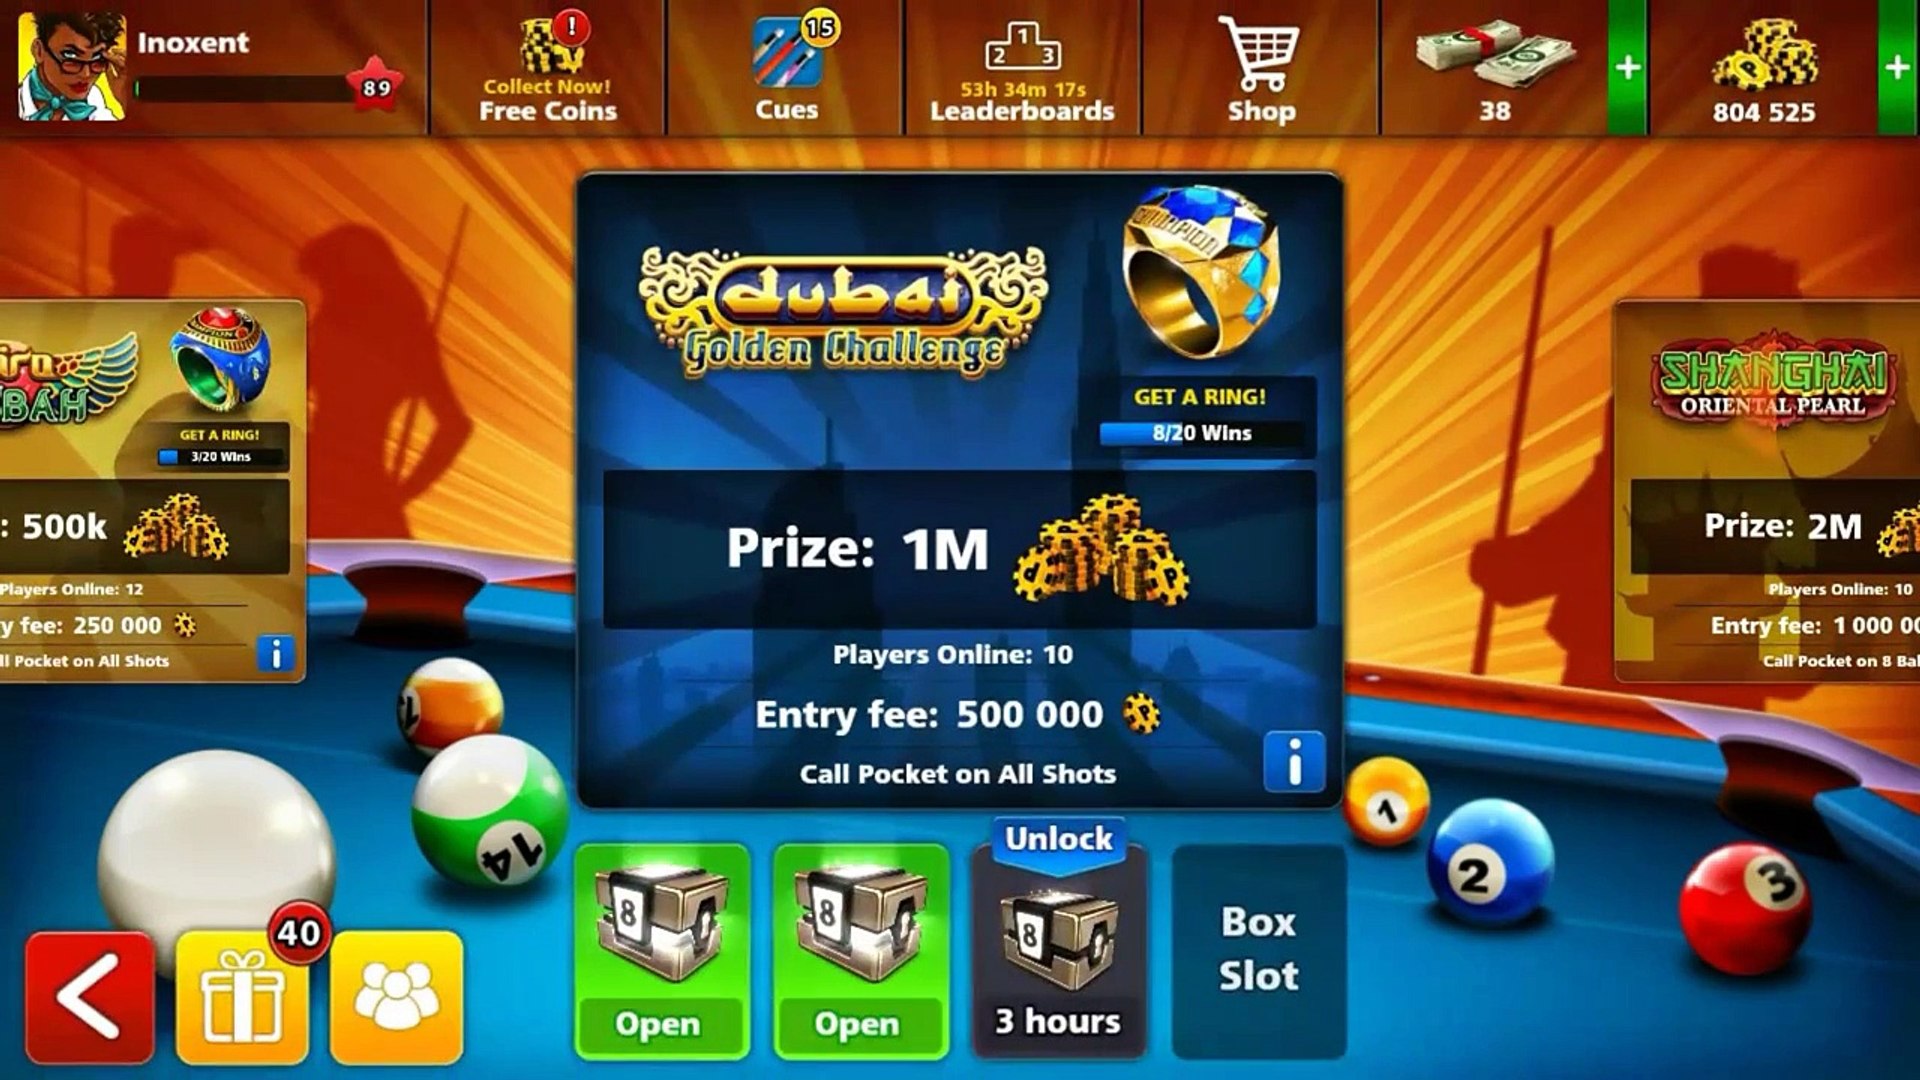 New Update 8 Ball Pool 3.14.1 [easily Transfer Coins] - 